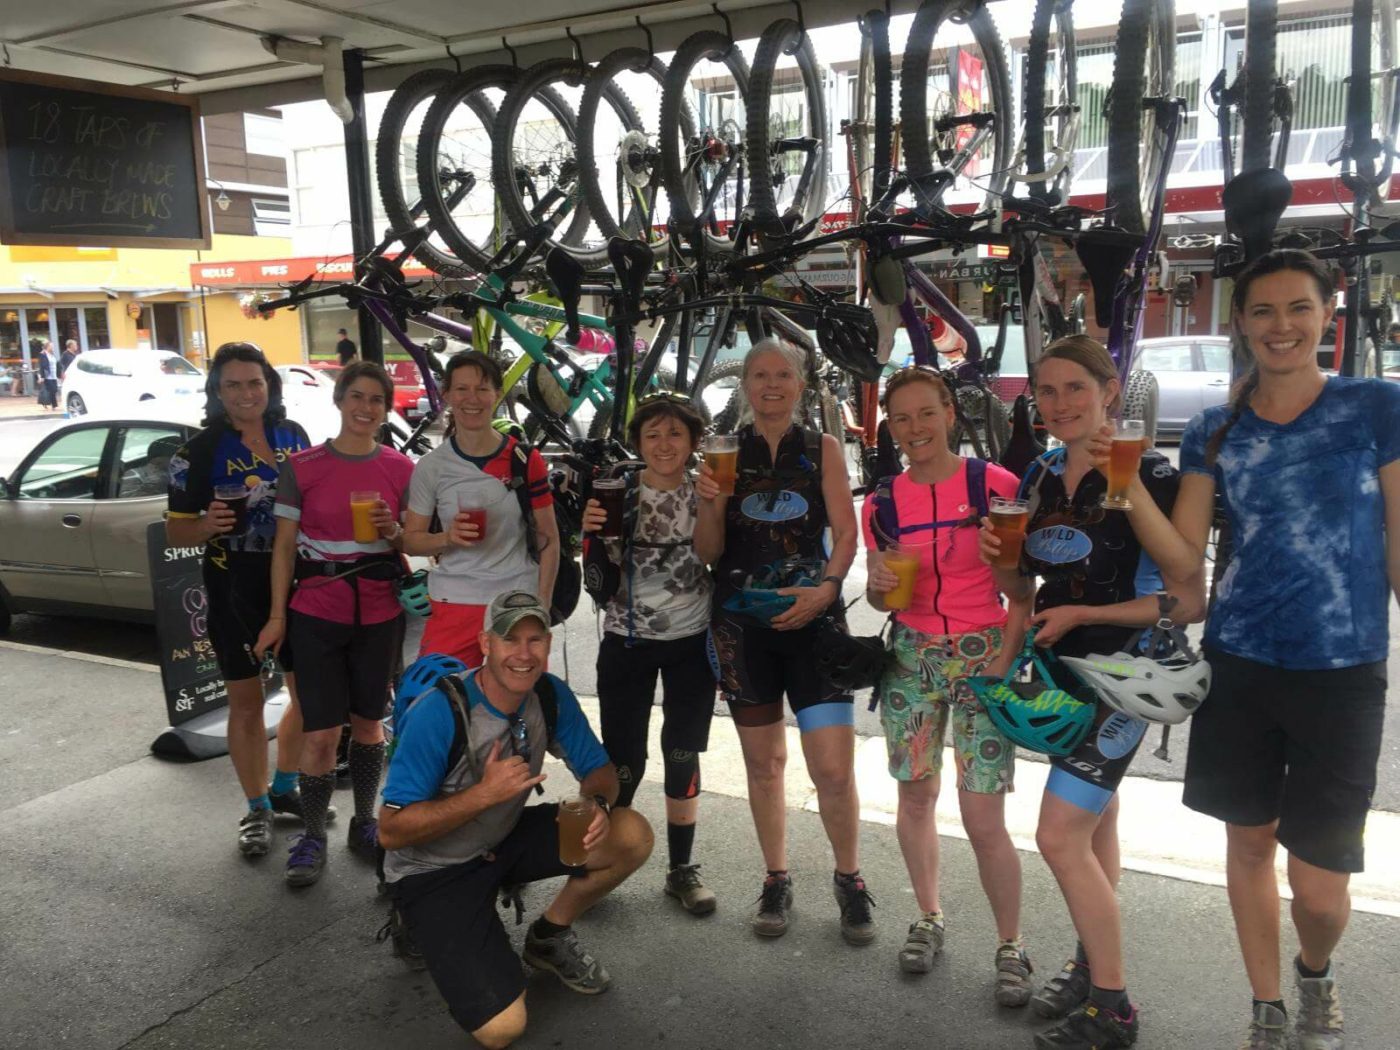 10 Tips for Group Mountain Bike Rides - Sacred Rides